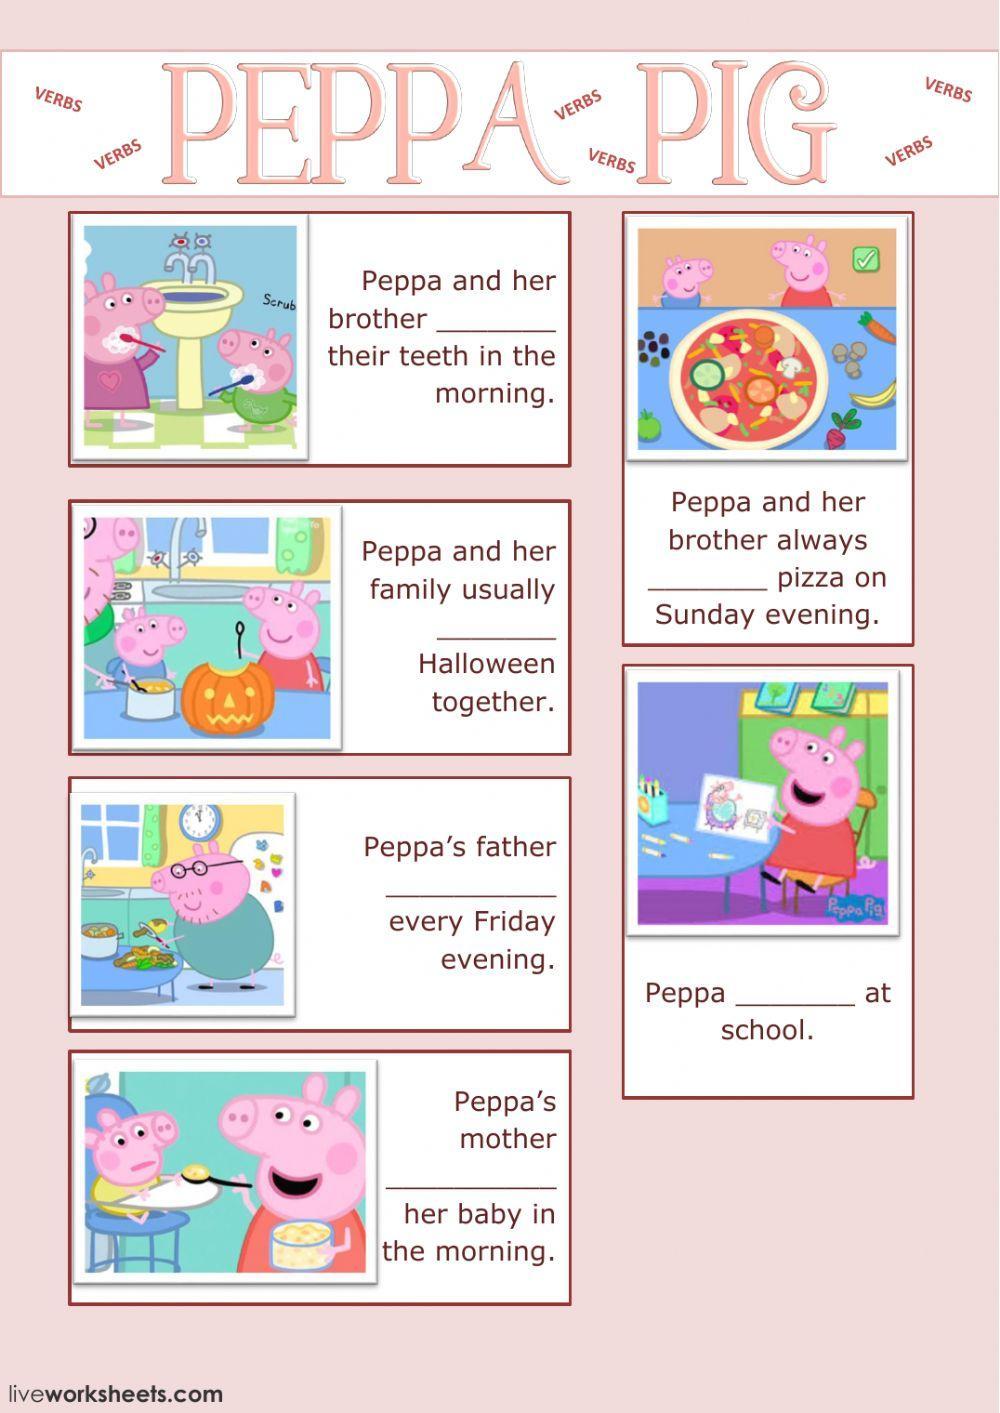 Learn YourVerbs With Peppa Pig - Cloze